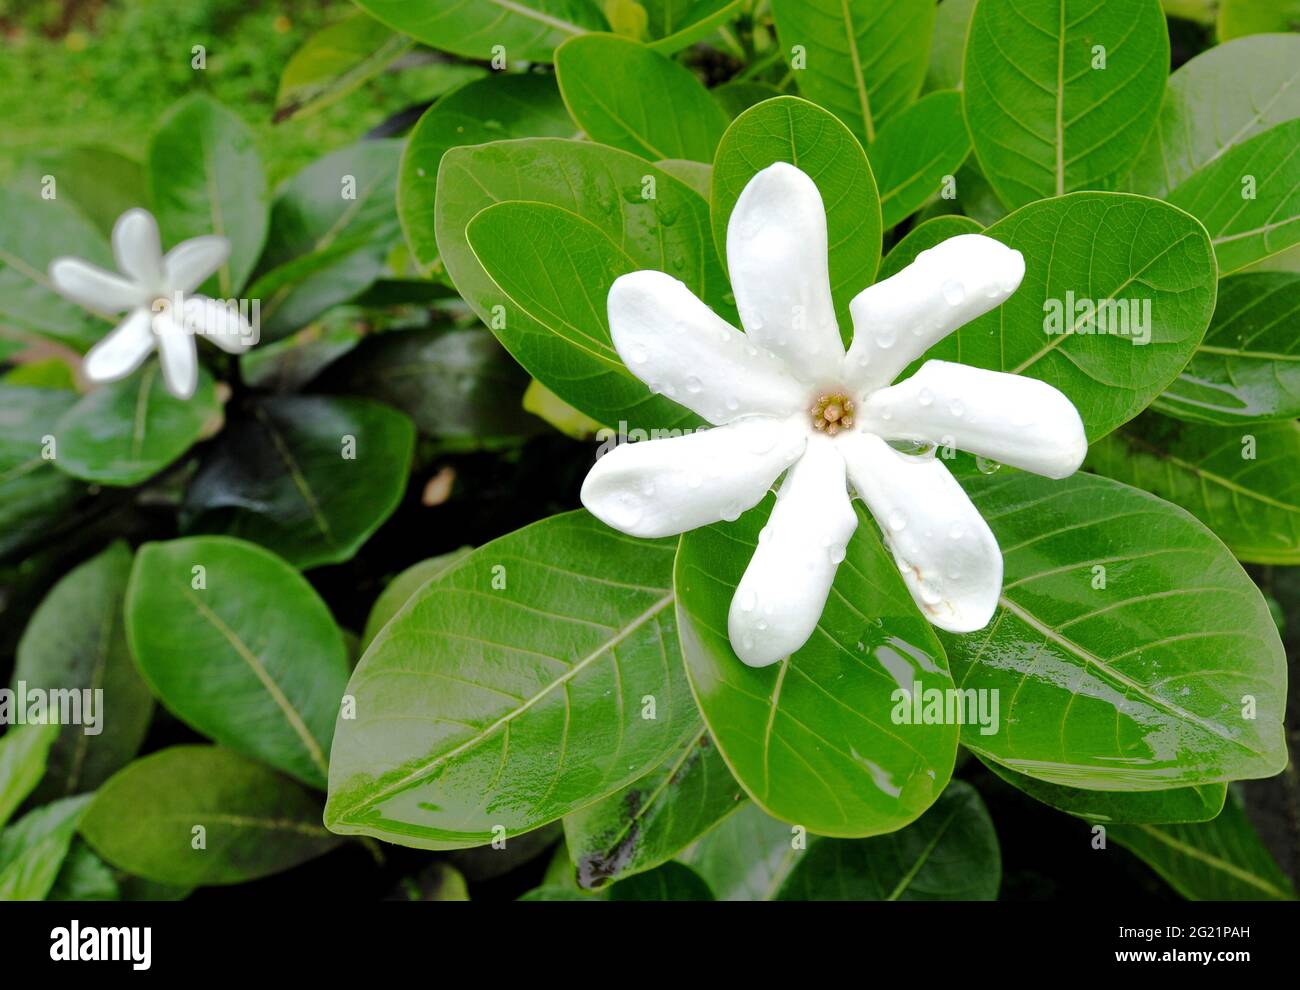 FRENCH POLYNESIA. MARQUESAS ISLANDS. THE PRODUCTION OF FLOWERS OF TIARE IS NOW A GOOD BUSINESS IN THE ISLANDS. Stock Photo